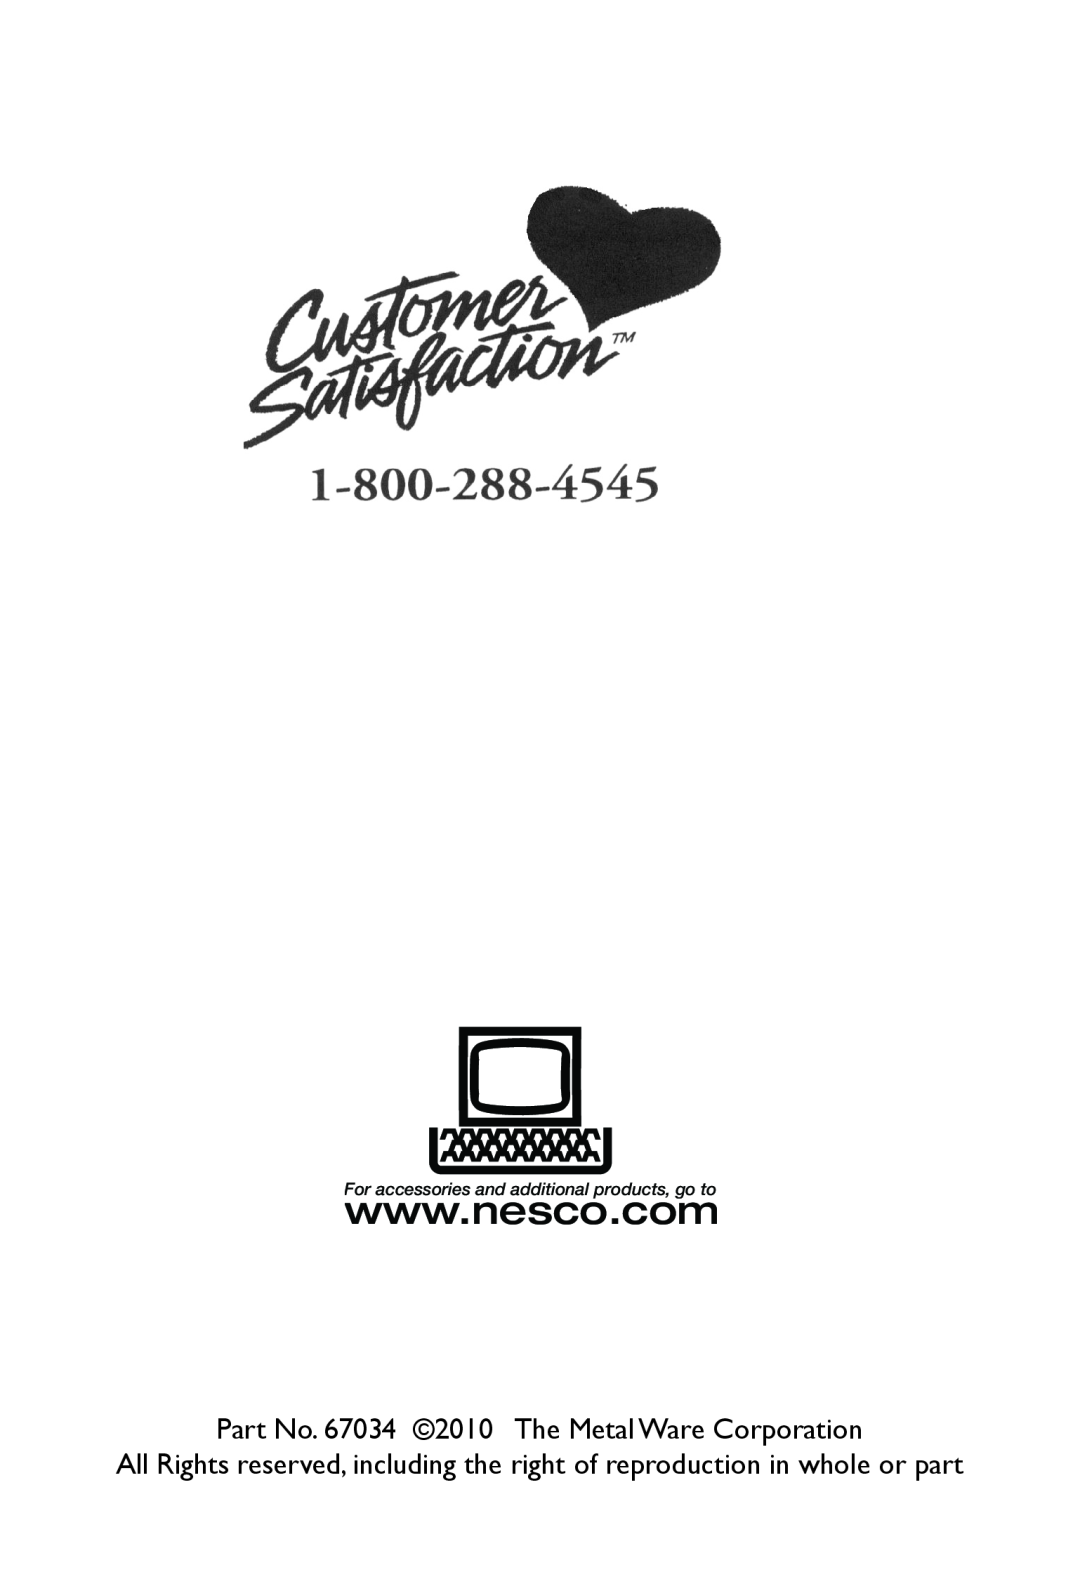 Nesco JB-50 manual Part No. 67034 2010 The Metal Ware Corporation, For accessories and additional products, go to 